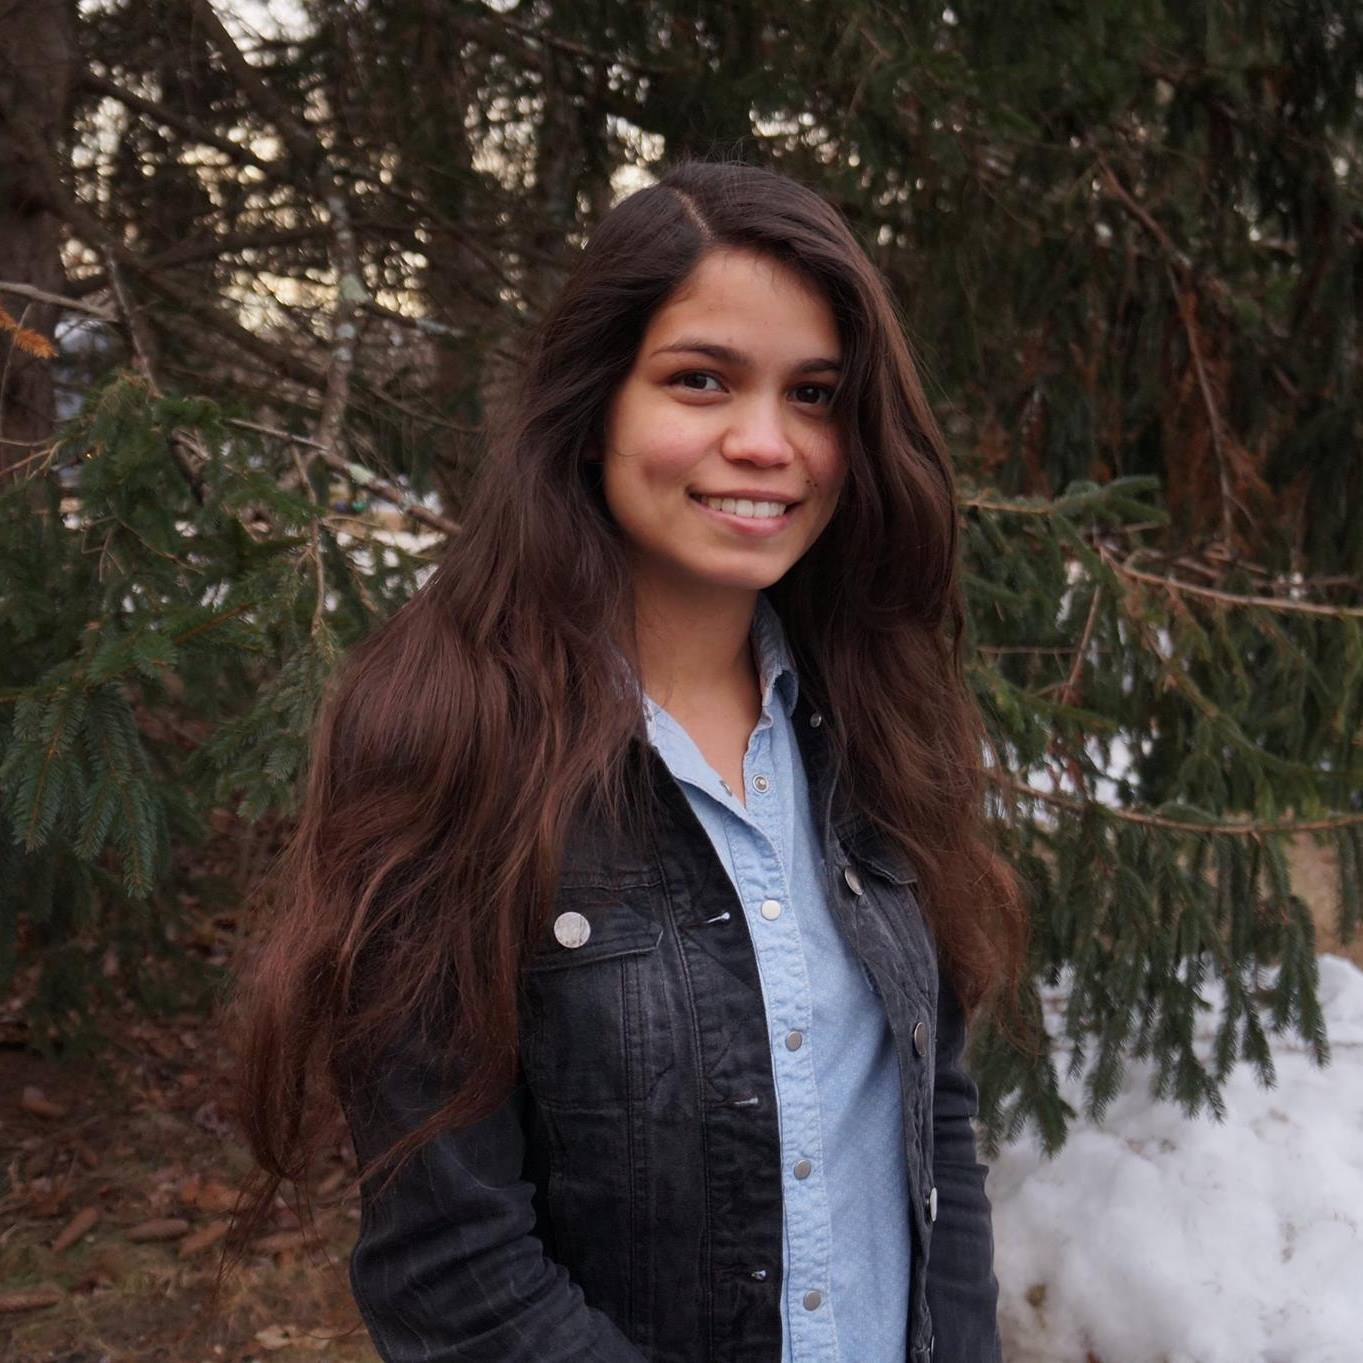 UNH wildlife and conservation biology major Angelica Beltrán Franco 